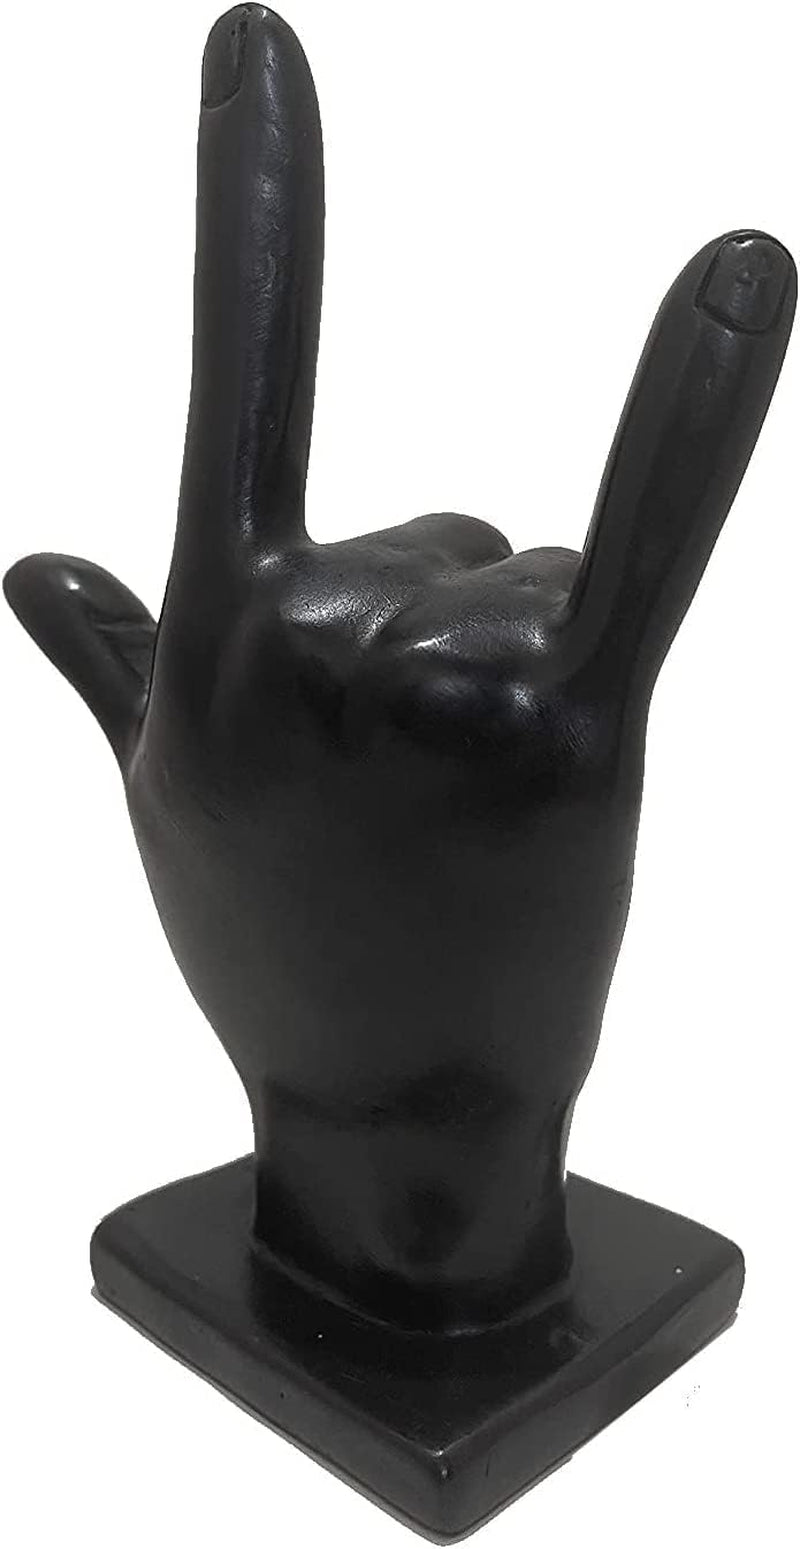 I Love You Hand Sculpture Color Black Tabletop & Shelf Decor Statue Gift for Holiday Christmas Anniversary Birthday Valenentine Day  Generic   